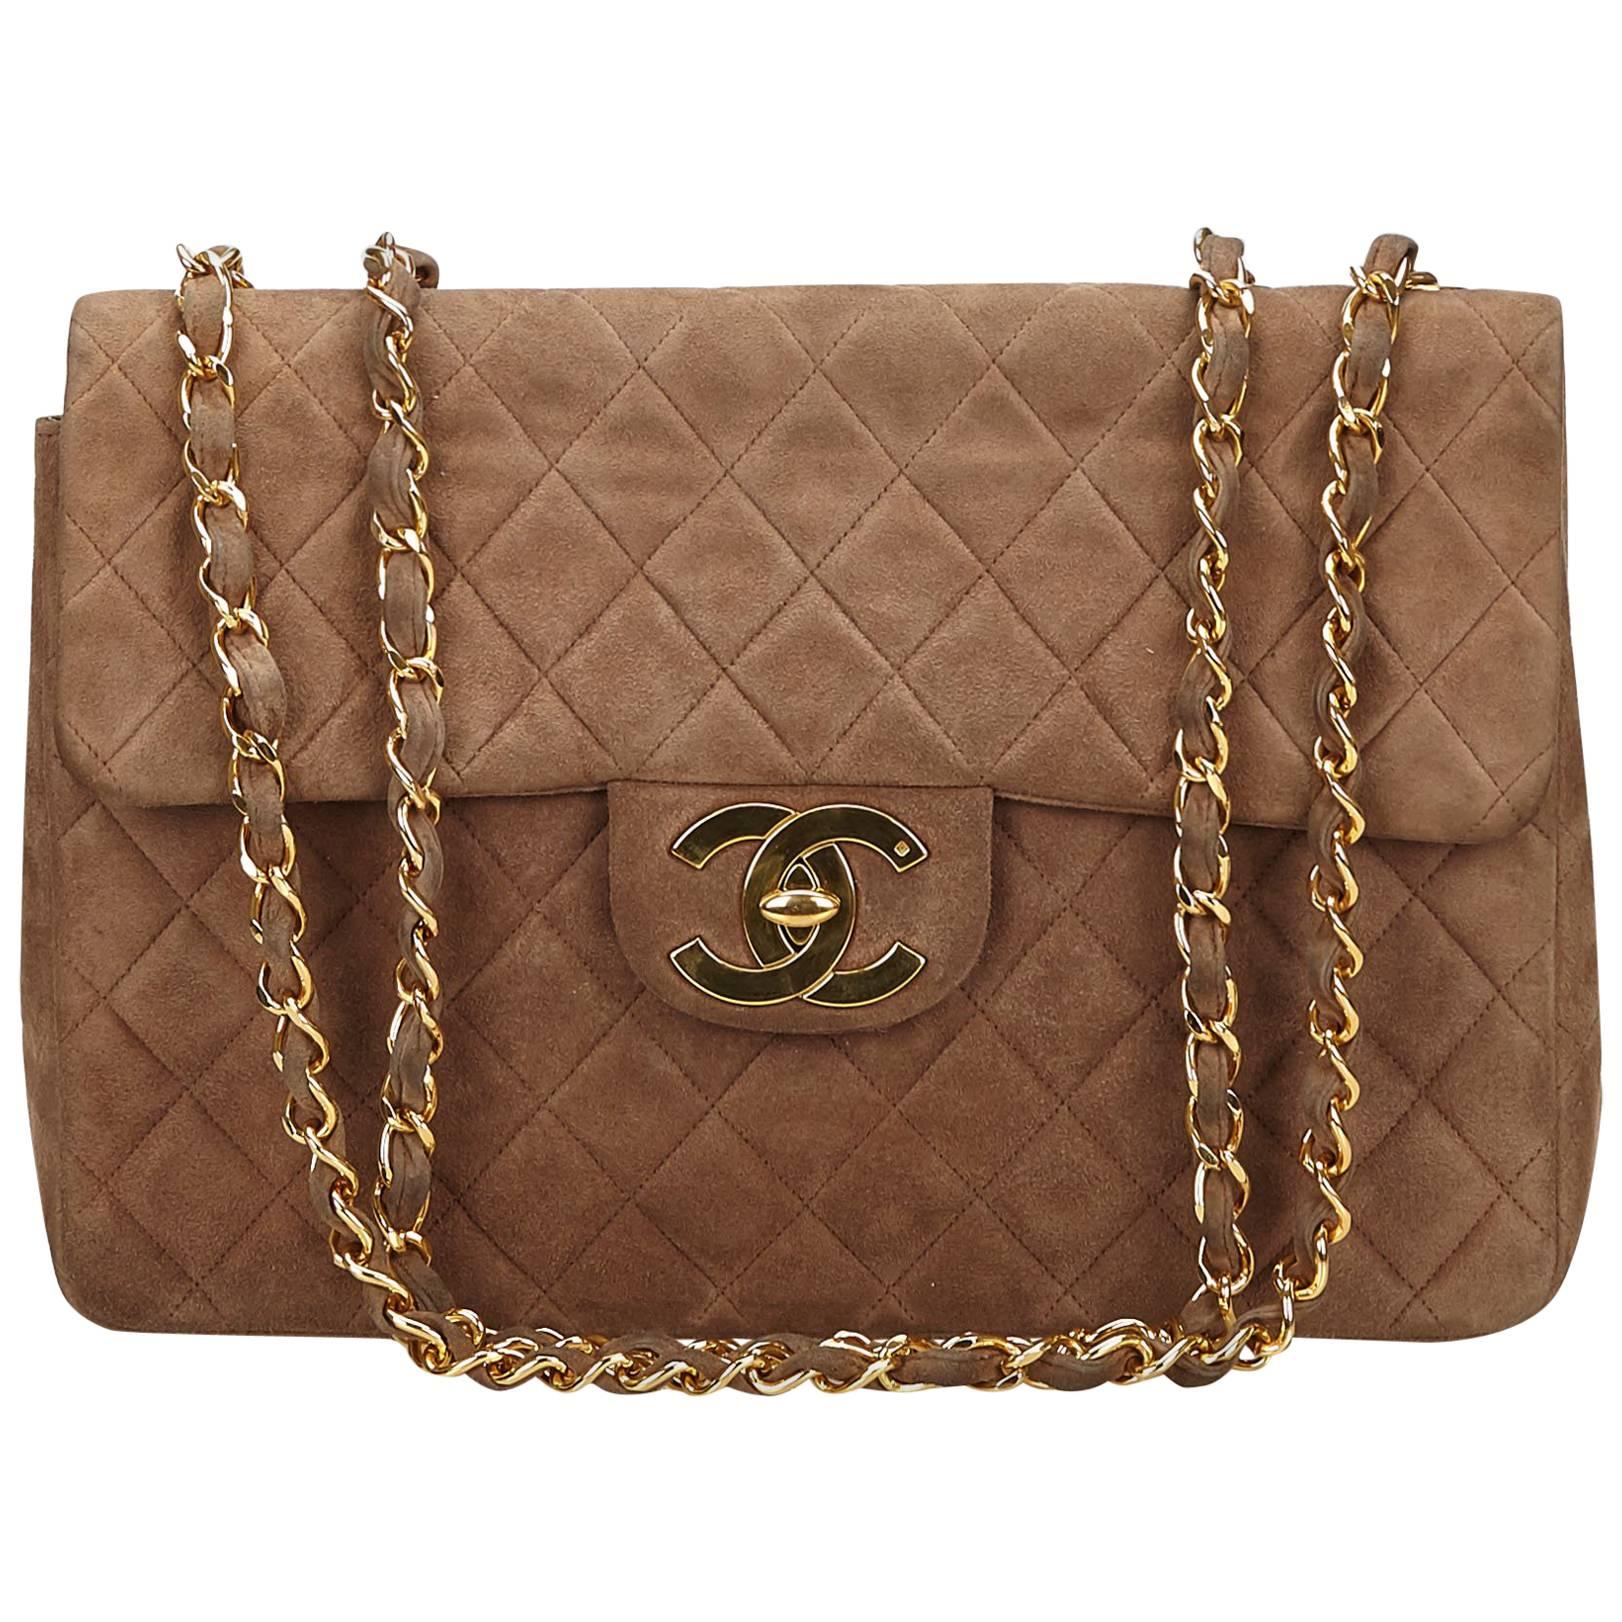 Chanel Brown Quilted Suede Maxi Shoulder Flap Bag